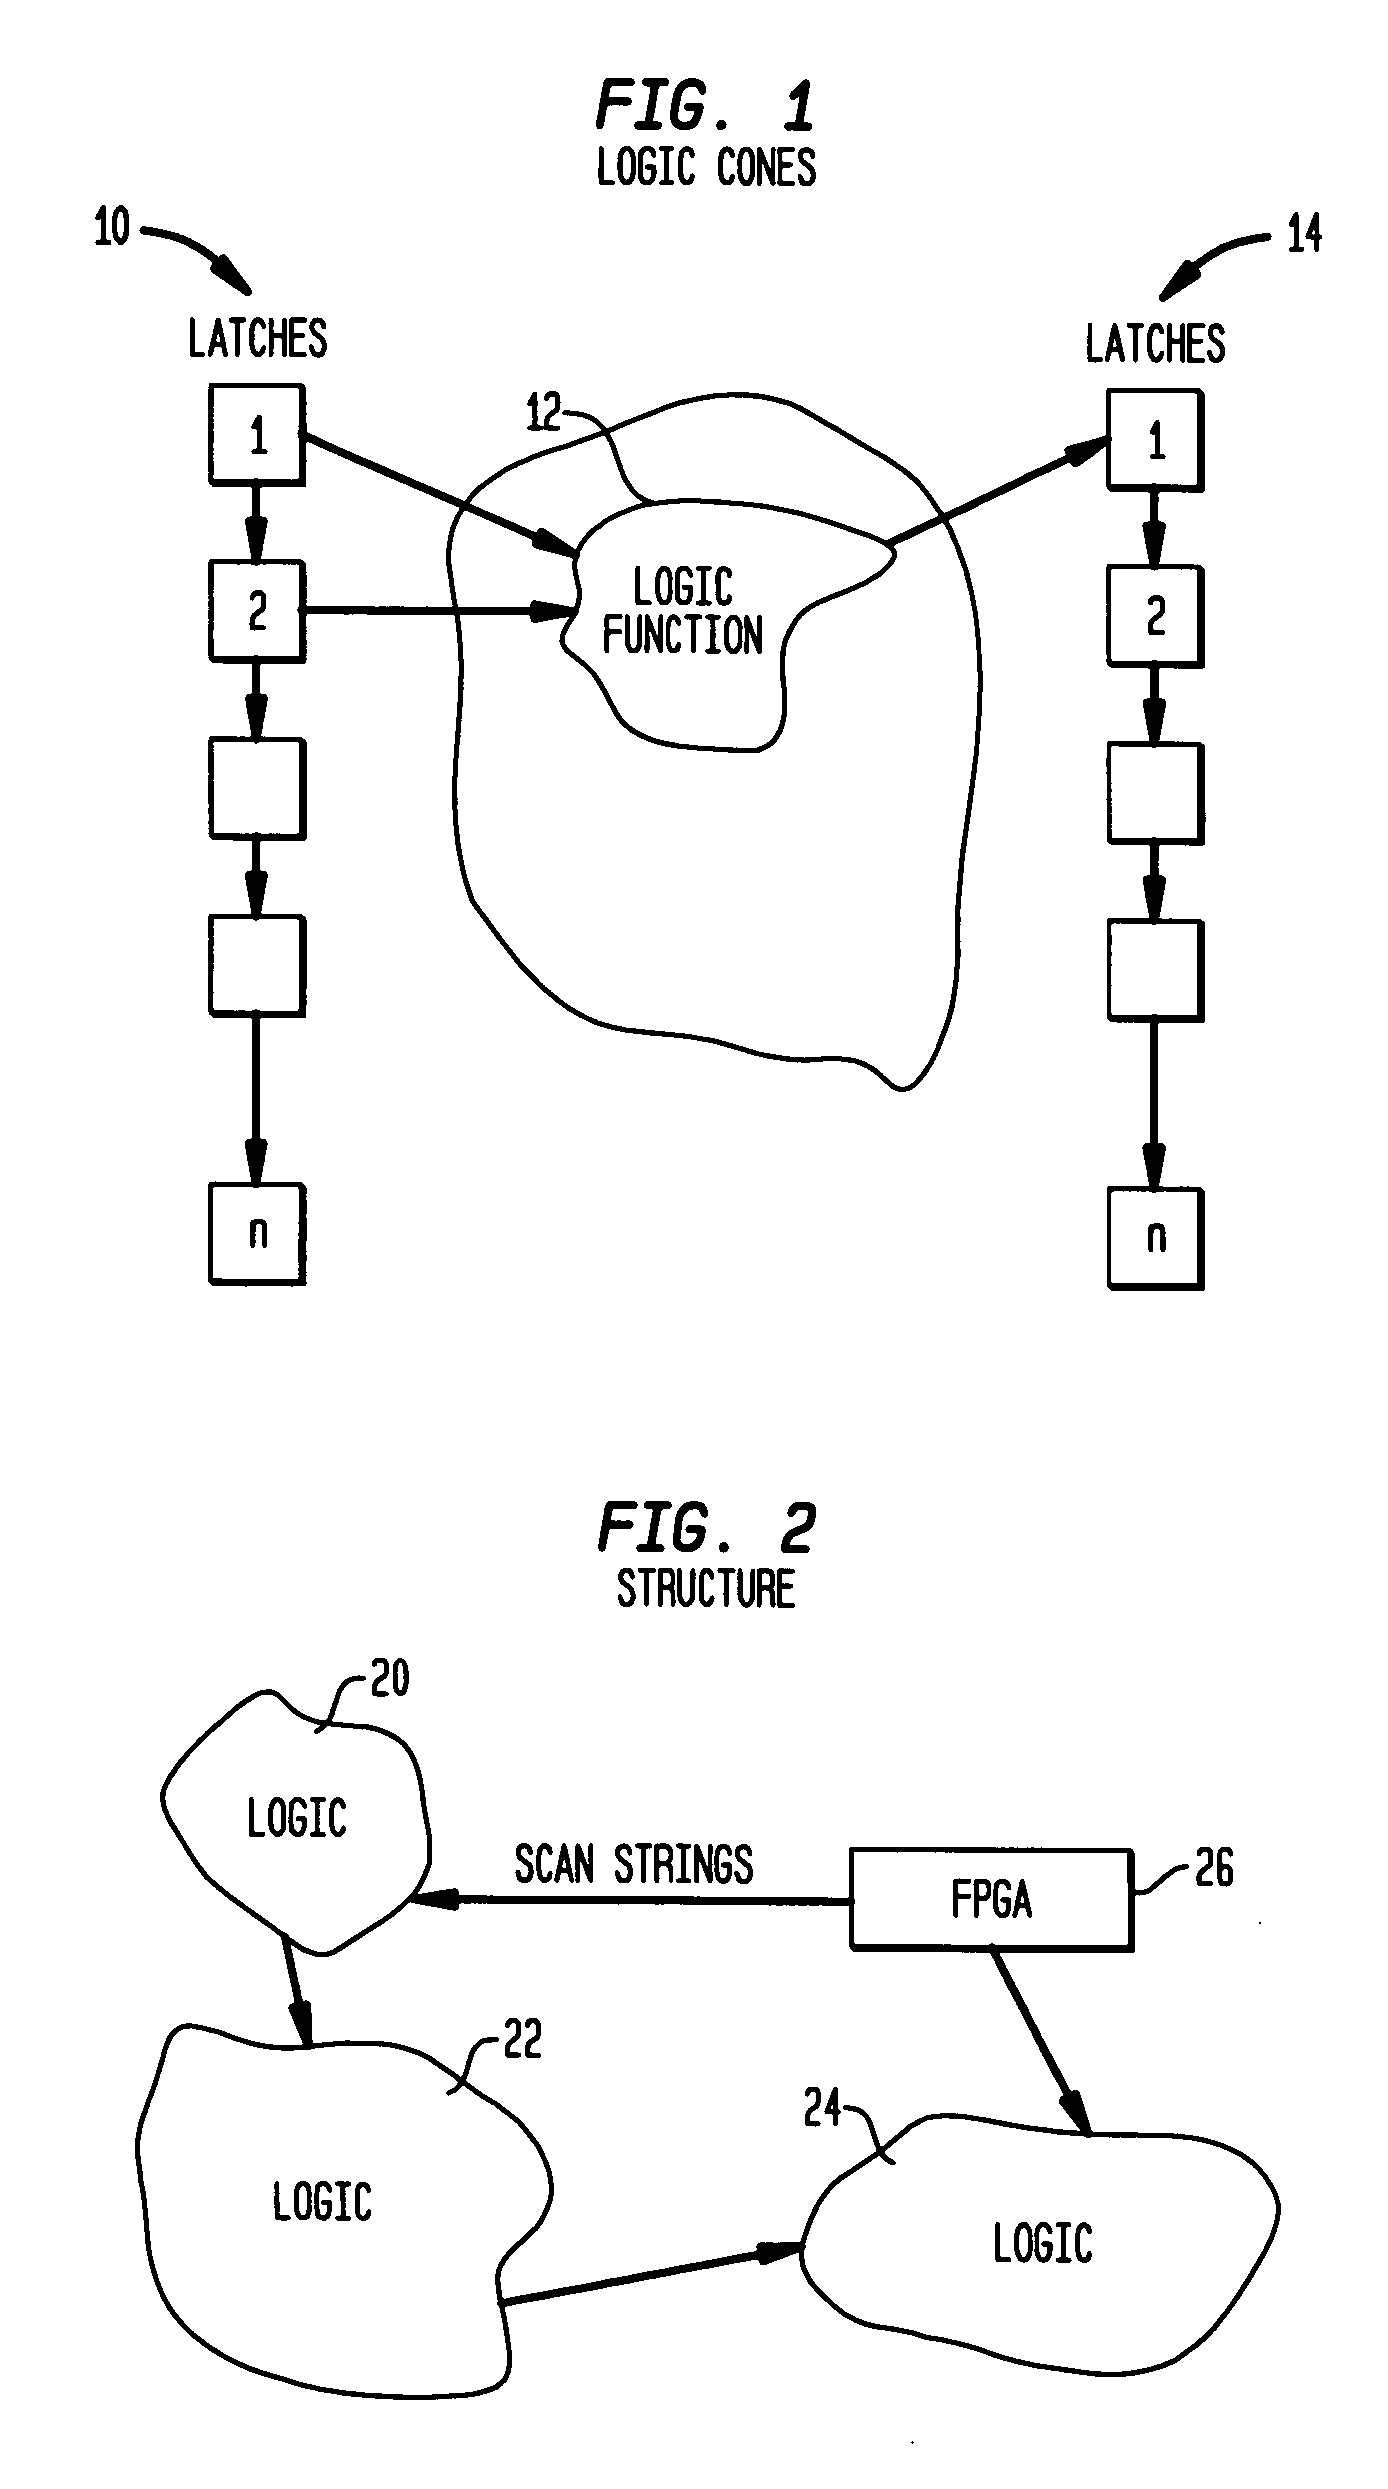 A system and method of providing error detection and correction capability in an integrated circuit using redundant logic cells of an embedded FPGA